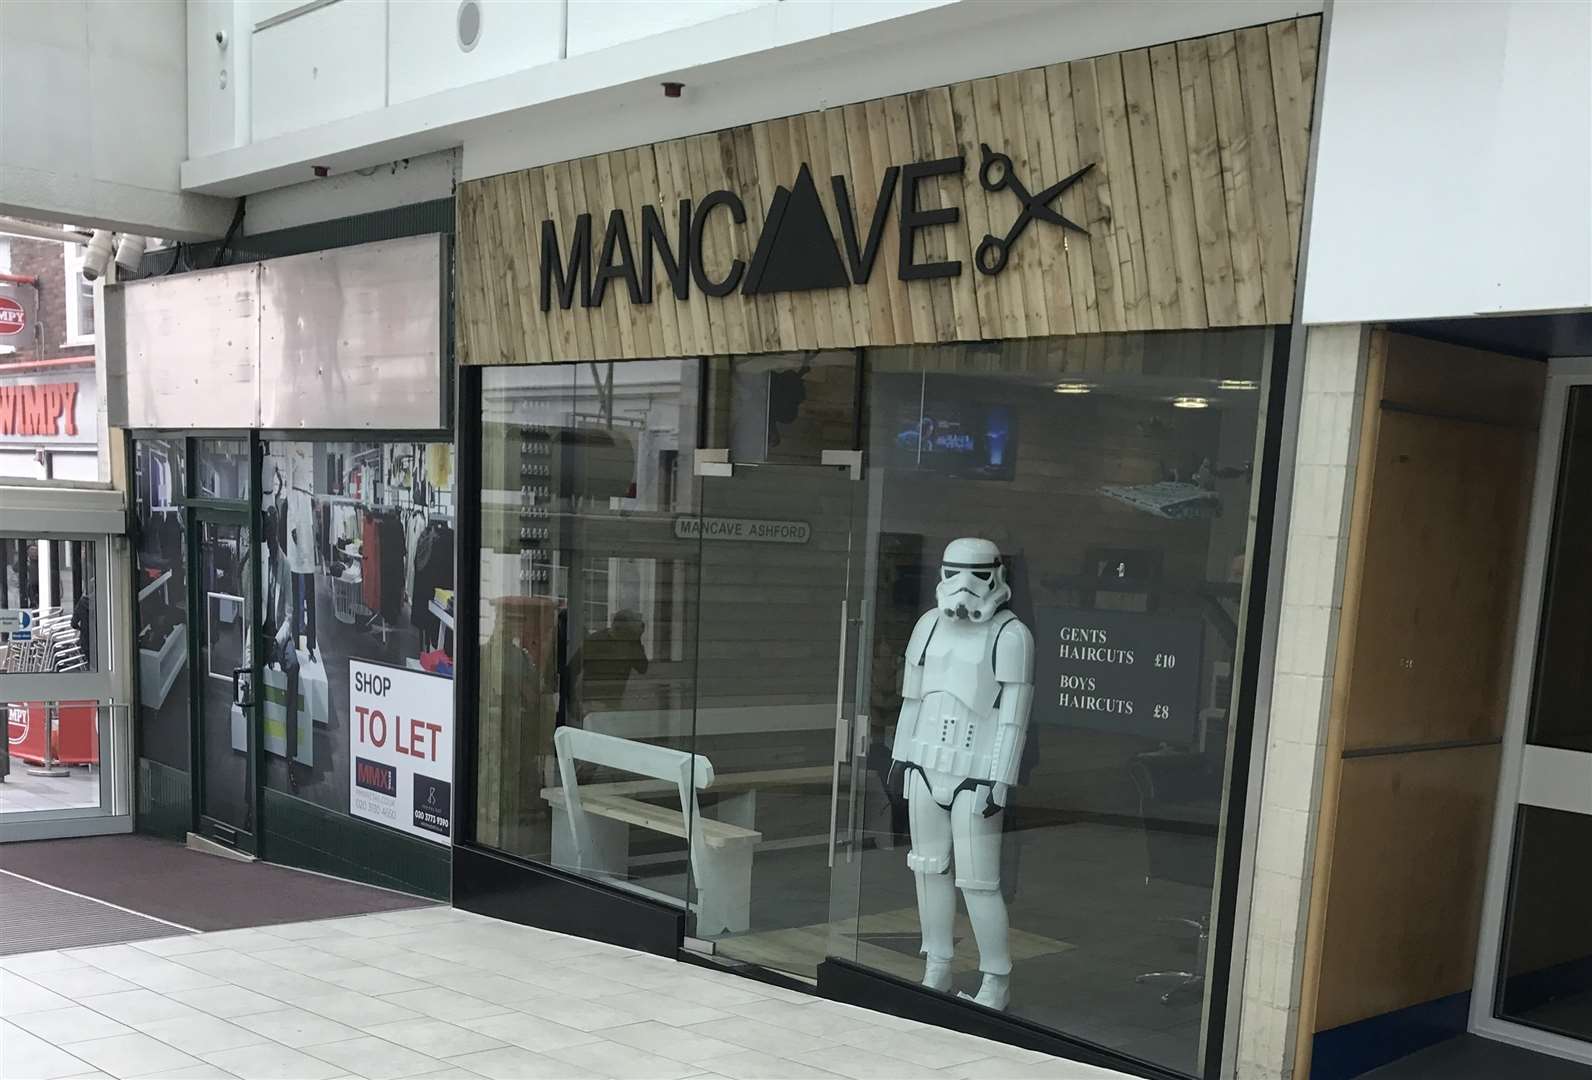 ManCave has already opened and a bakery is set to open next door